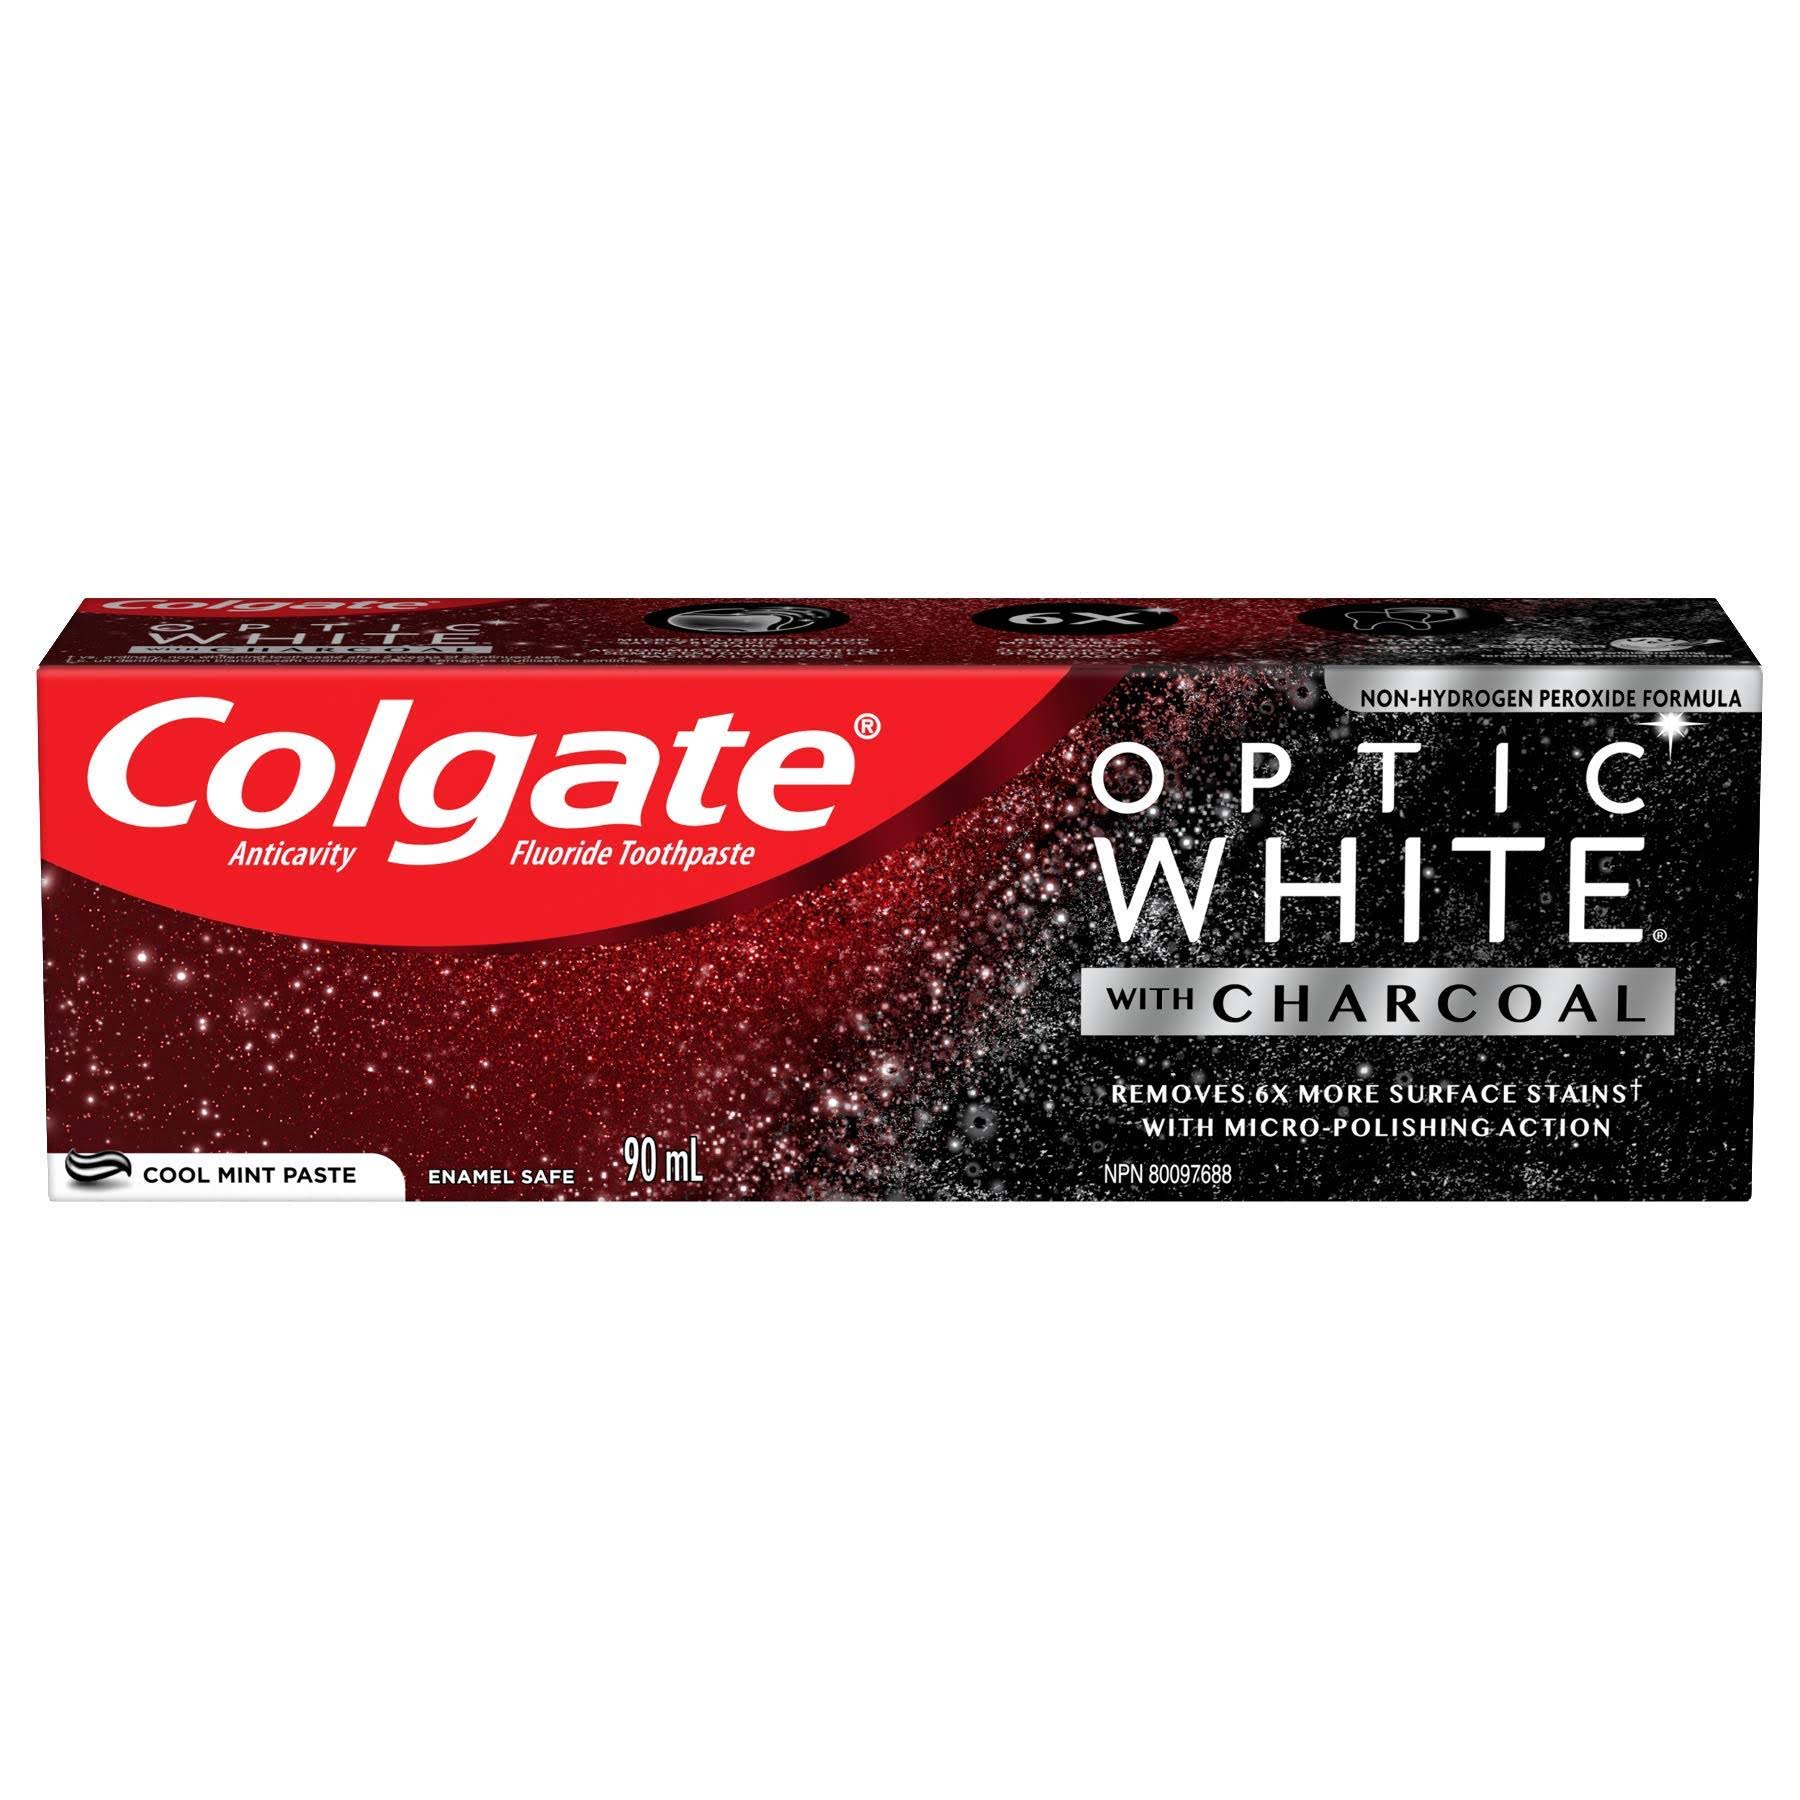 Colgate Optic White Teeth Whitening Charcoal Toothpaste, Cool Mint - 90Ml